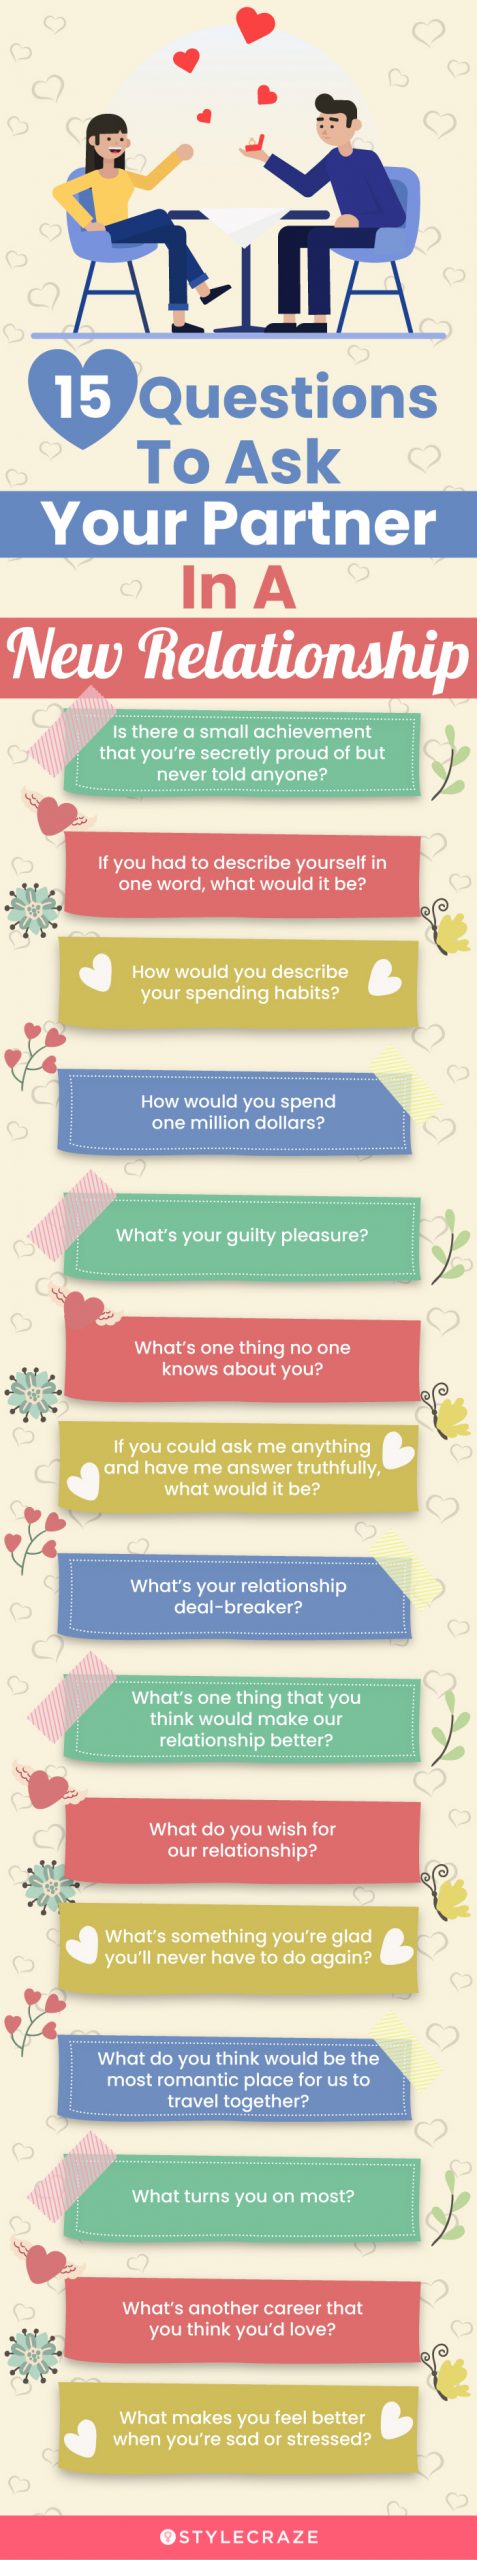 15 questions to ask your partner in a new relationship (infographic)